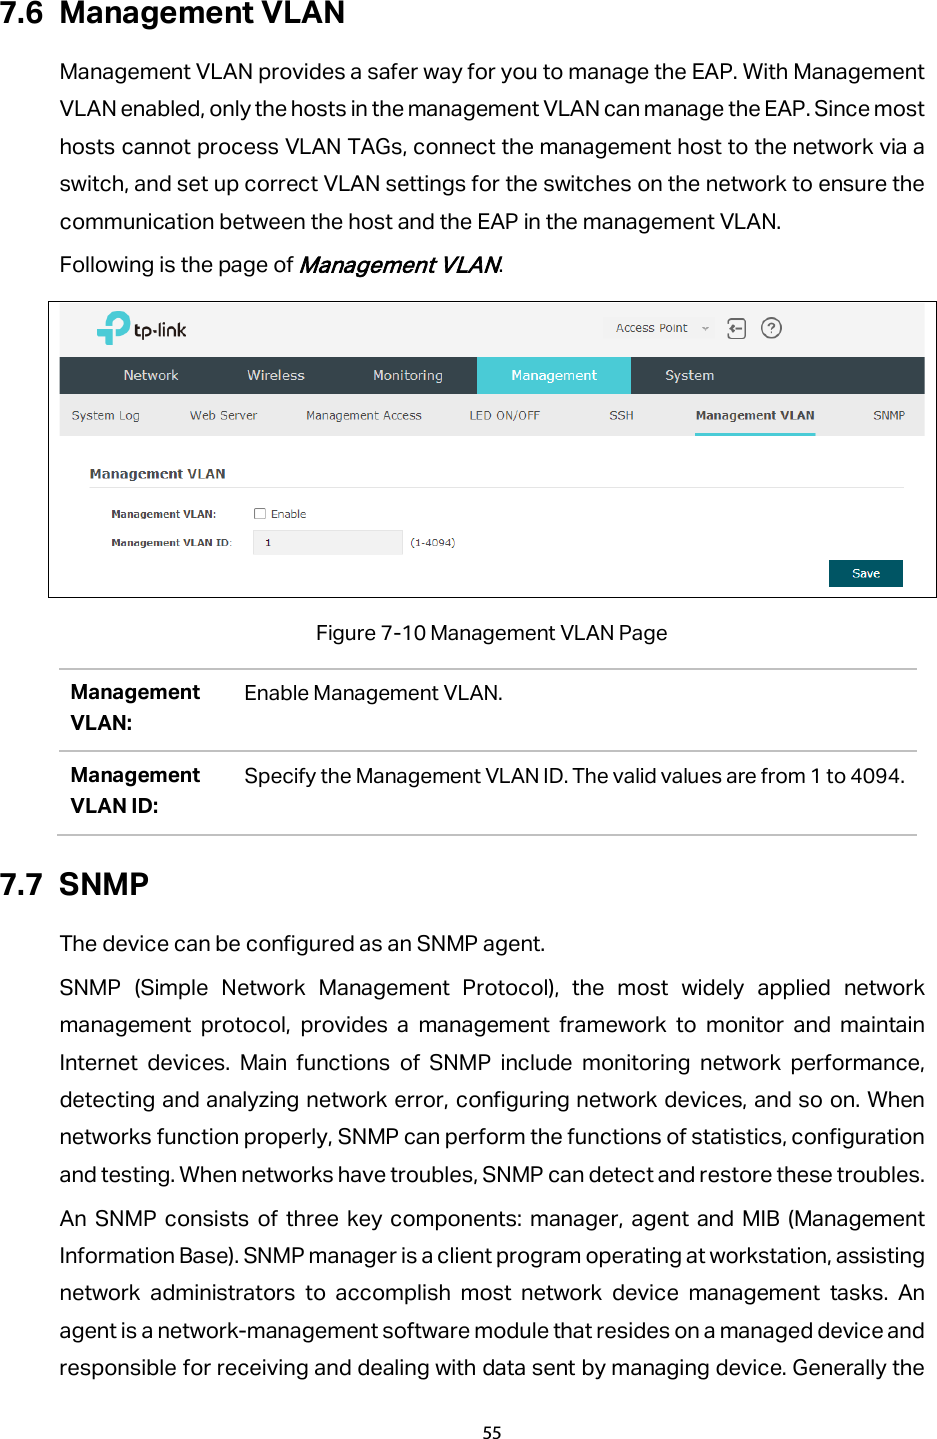 7.6 Management VLAN Management VLAN provides a safer way for you to manage the EAP. With Management VLAN enabled, only the hosts in the management VLAN can manage the EAP. Since most hosts cannot process VLAN TAGs, connect the management host to the network via a switch, and set up correct VLAN settings for the switches on the network to ensure the communication between the host and the EAP in the management VLAN. Following is the page of Management VLAN.  Figure 7-10 Management VLAN Page Management VLAN: Enable Management VLAN. Management VLAN ID: Specify the Management VLAN ID. The valid values are from 1 to 4094. 7.7 SNMP The device can be configured as an SNMP agent. SNMP (Simple Network Management Protocol), the most widely applied network management protocol, provides a management framework to monitor and maintain Internet devices. Main functions of SNMP include monitoring network performance, detecting and analyzing network error, configuring network devices, and so on. When networks function properly, SNMP can perform the functions of statistics, configuration and testing. When networks have troubles, SNMP can detect and restore these troubles. An SNMP consists of three key components: manager, agent and MIB (Management Information Base). SNMP manager is a client program operating at workstation, assisting network administrators to accomplish most network device management tasks. An agent is a network-management software module that resides on a managed device and responsible for receiving and dealing with data sent by managing device. Generally the 55  